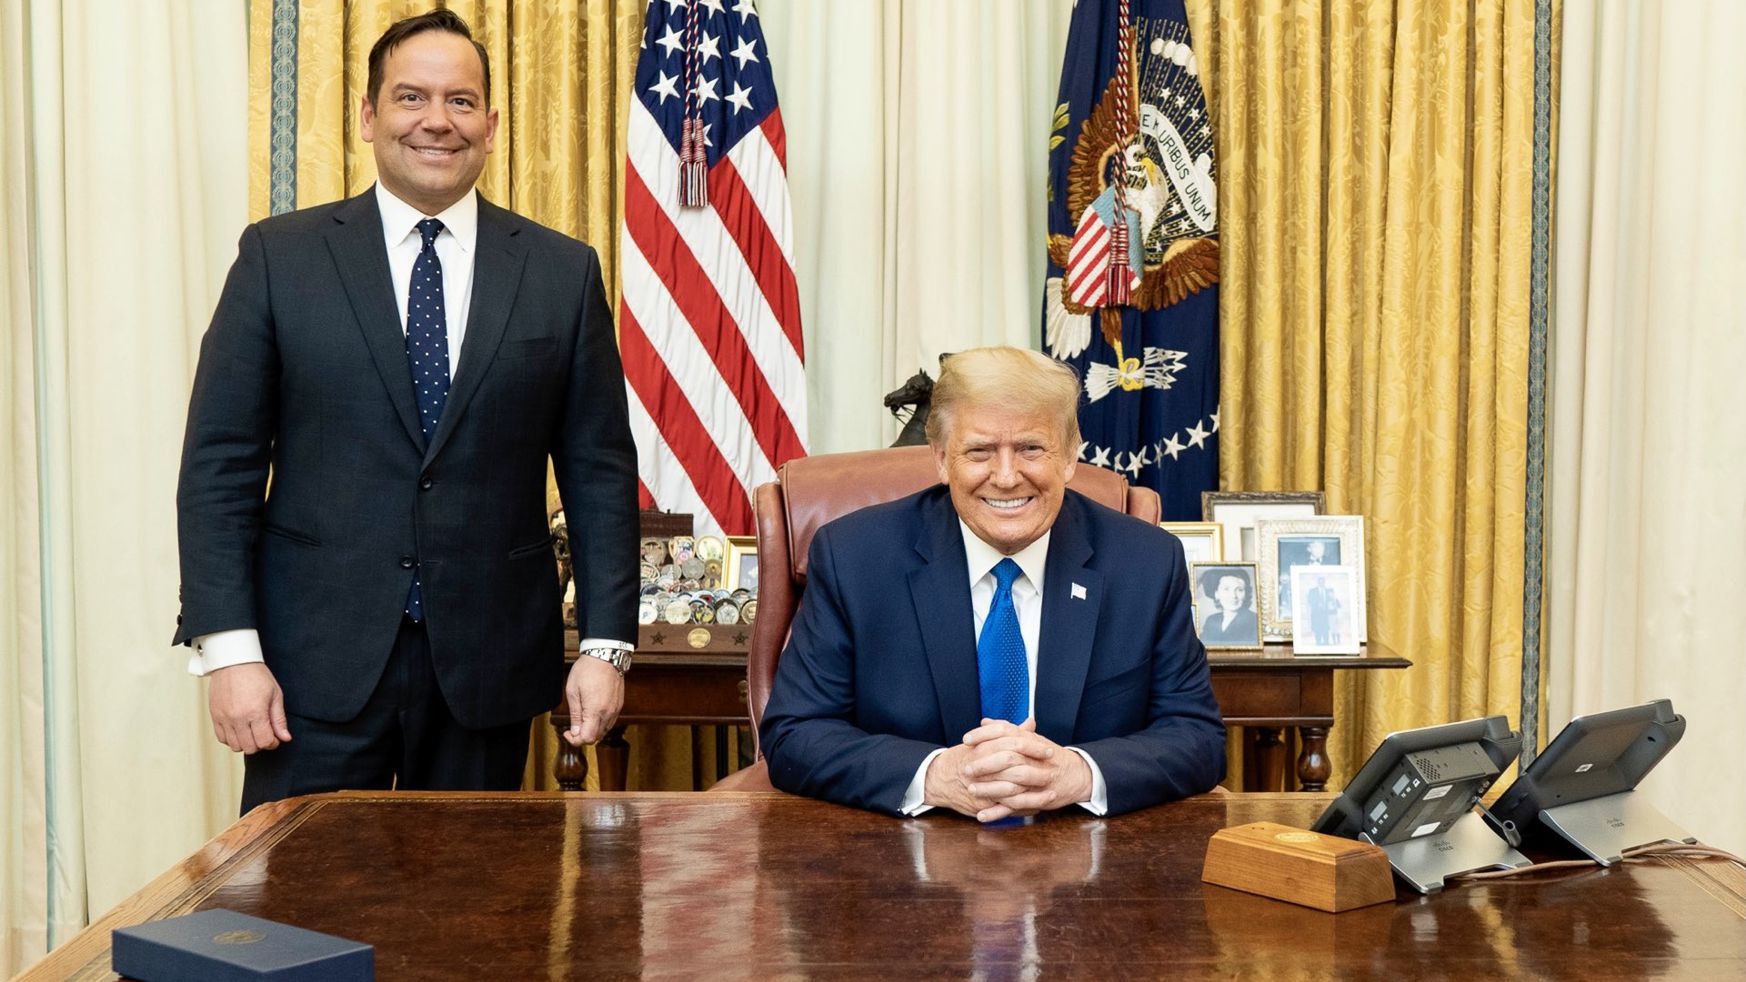 President Trump and Steve Cortes in the Oval Office